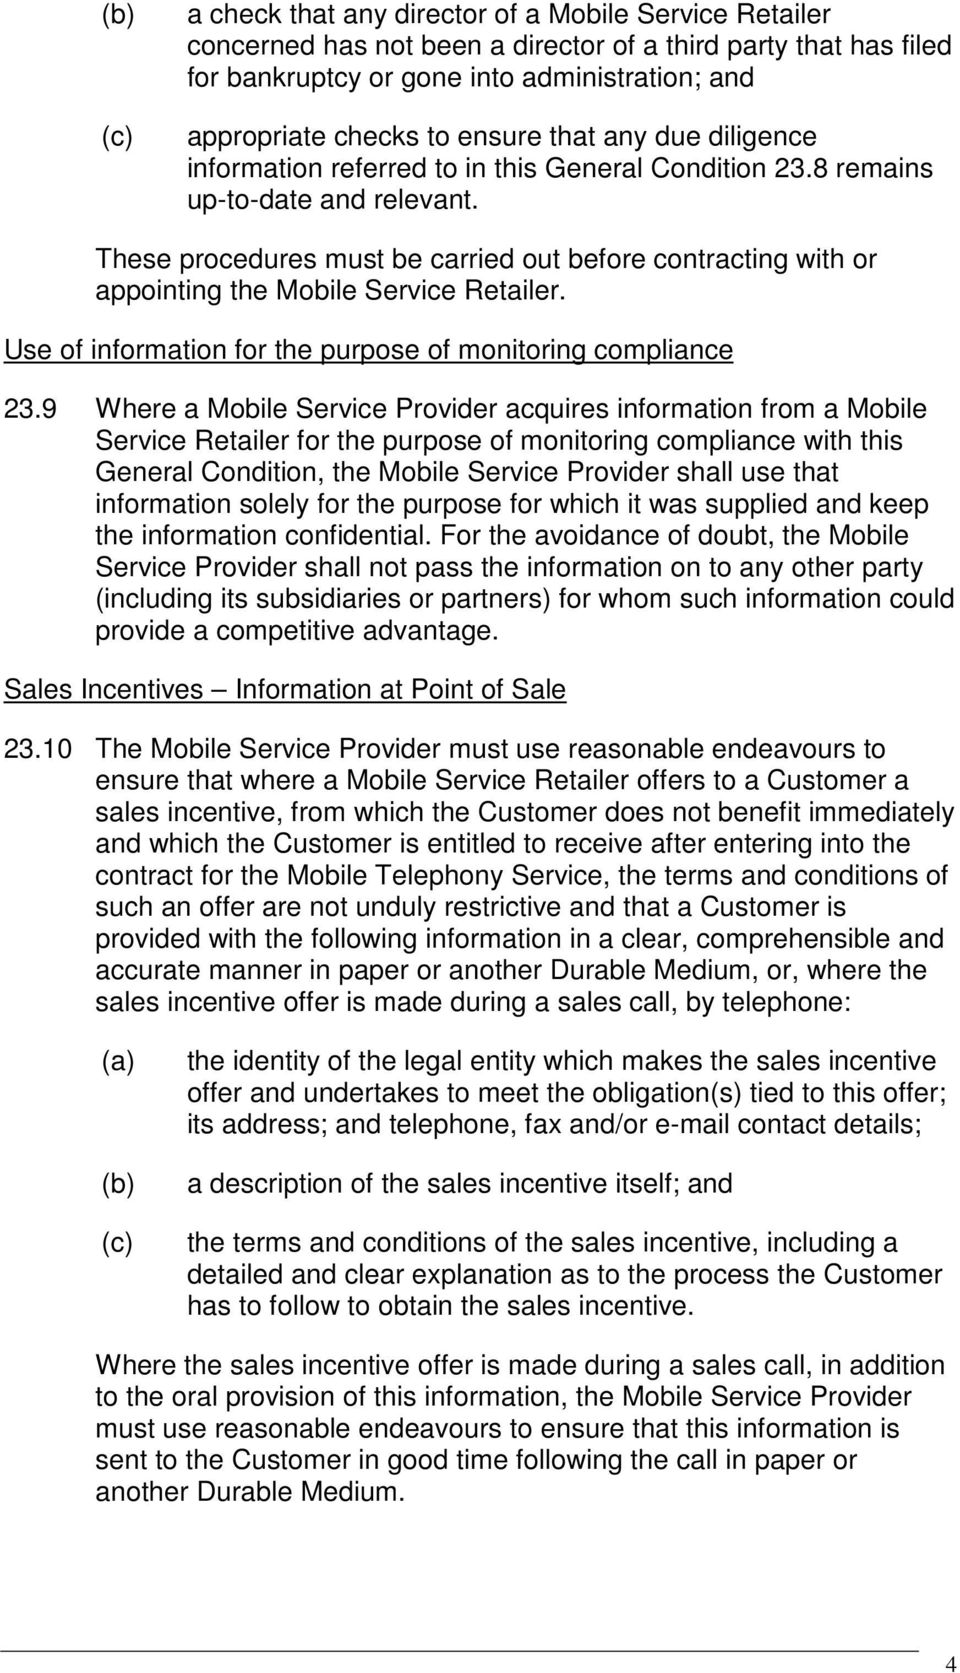 These procedures must be carried out before contracting with or appointing the Mobile Service Retailer. Use of information for the purpose of monitoring compliance 23.